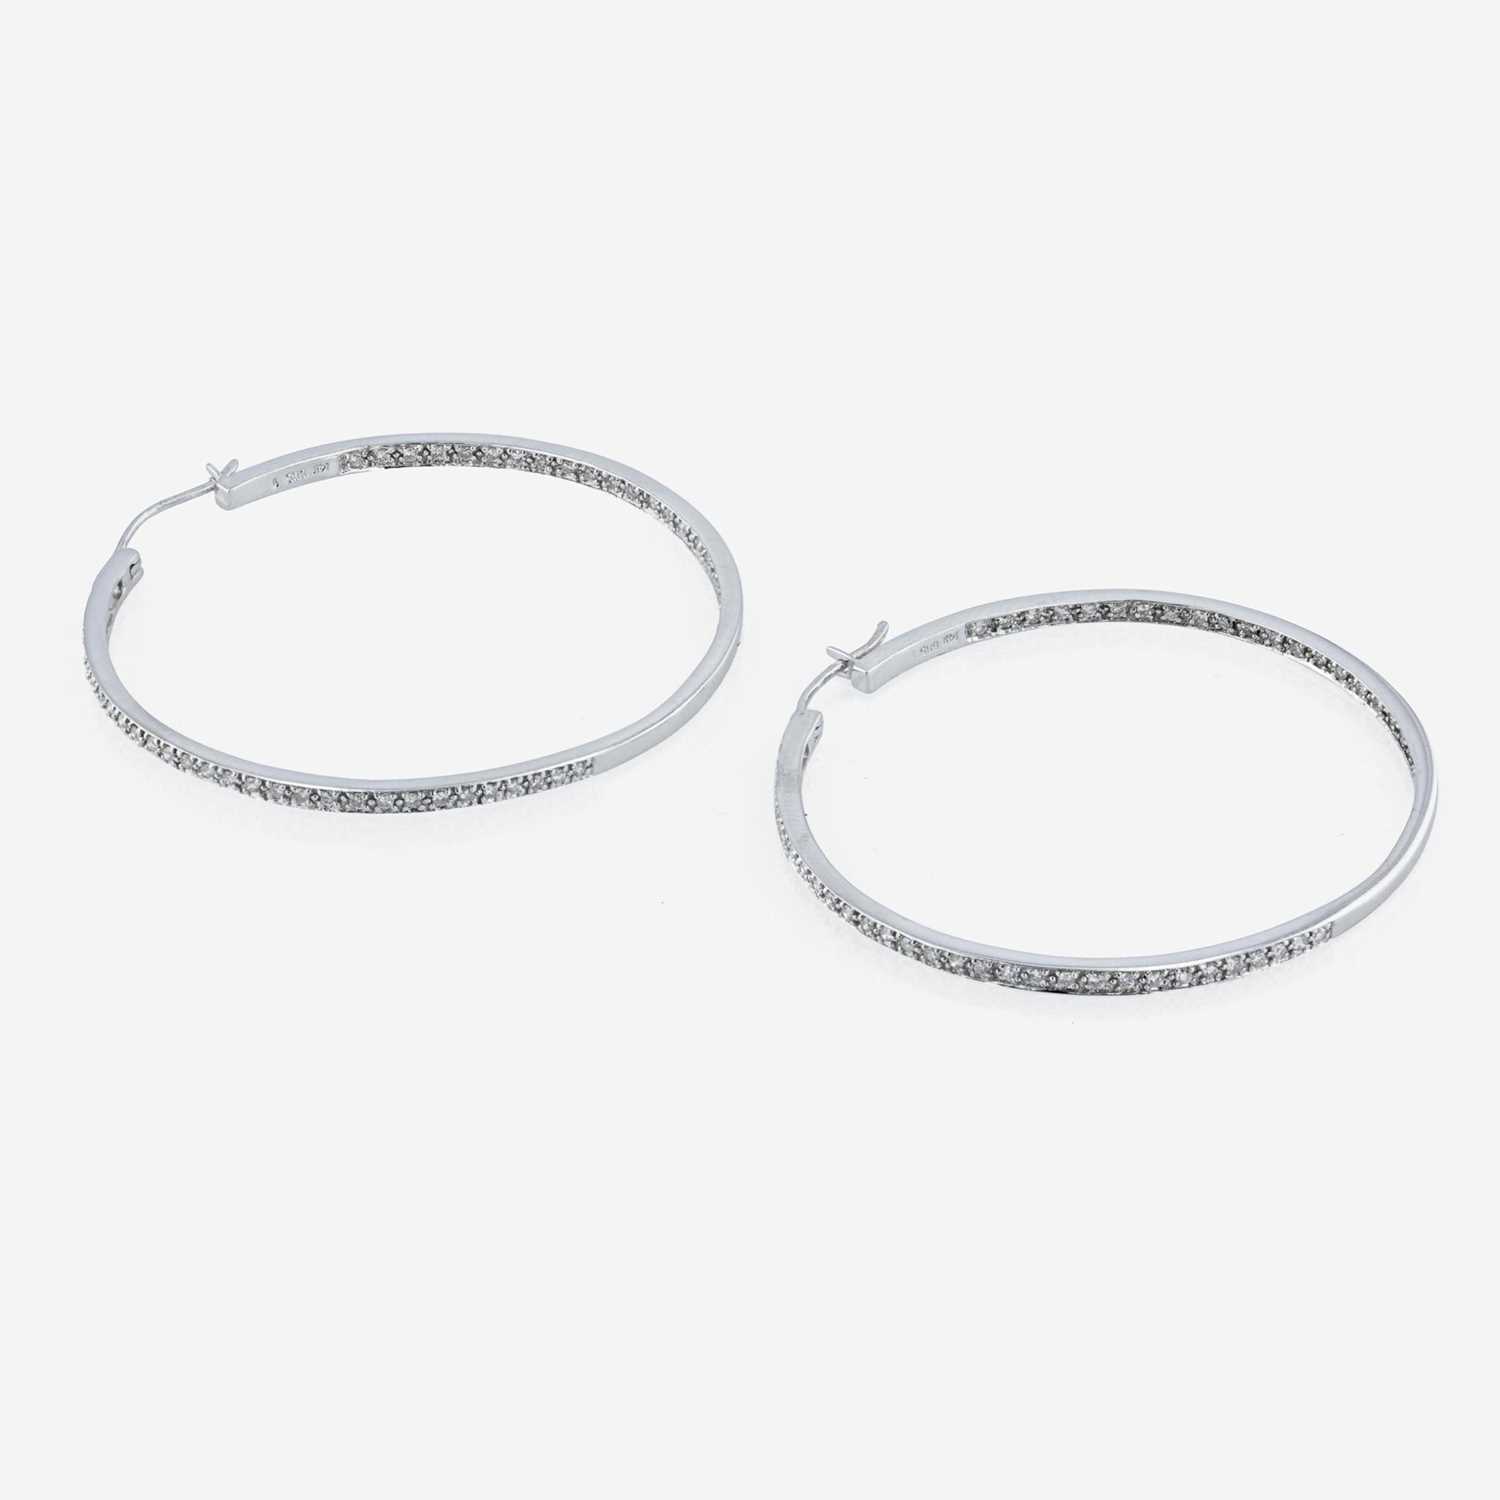 Lot 59 - A pair of 14K white gold and diamond hoop earrings